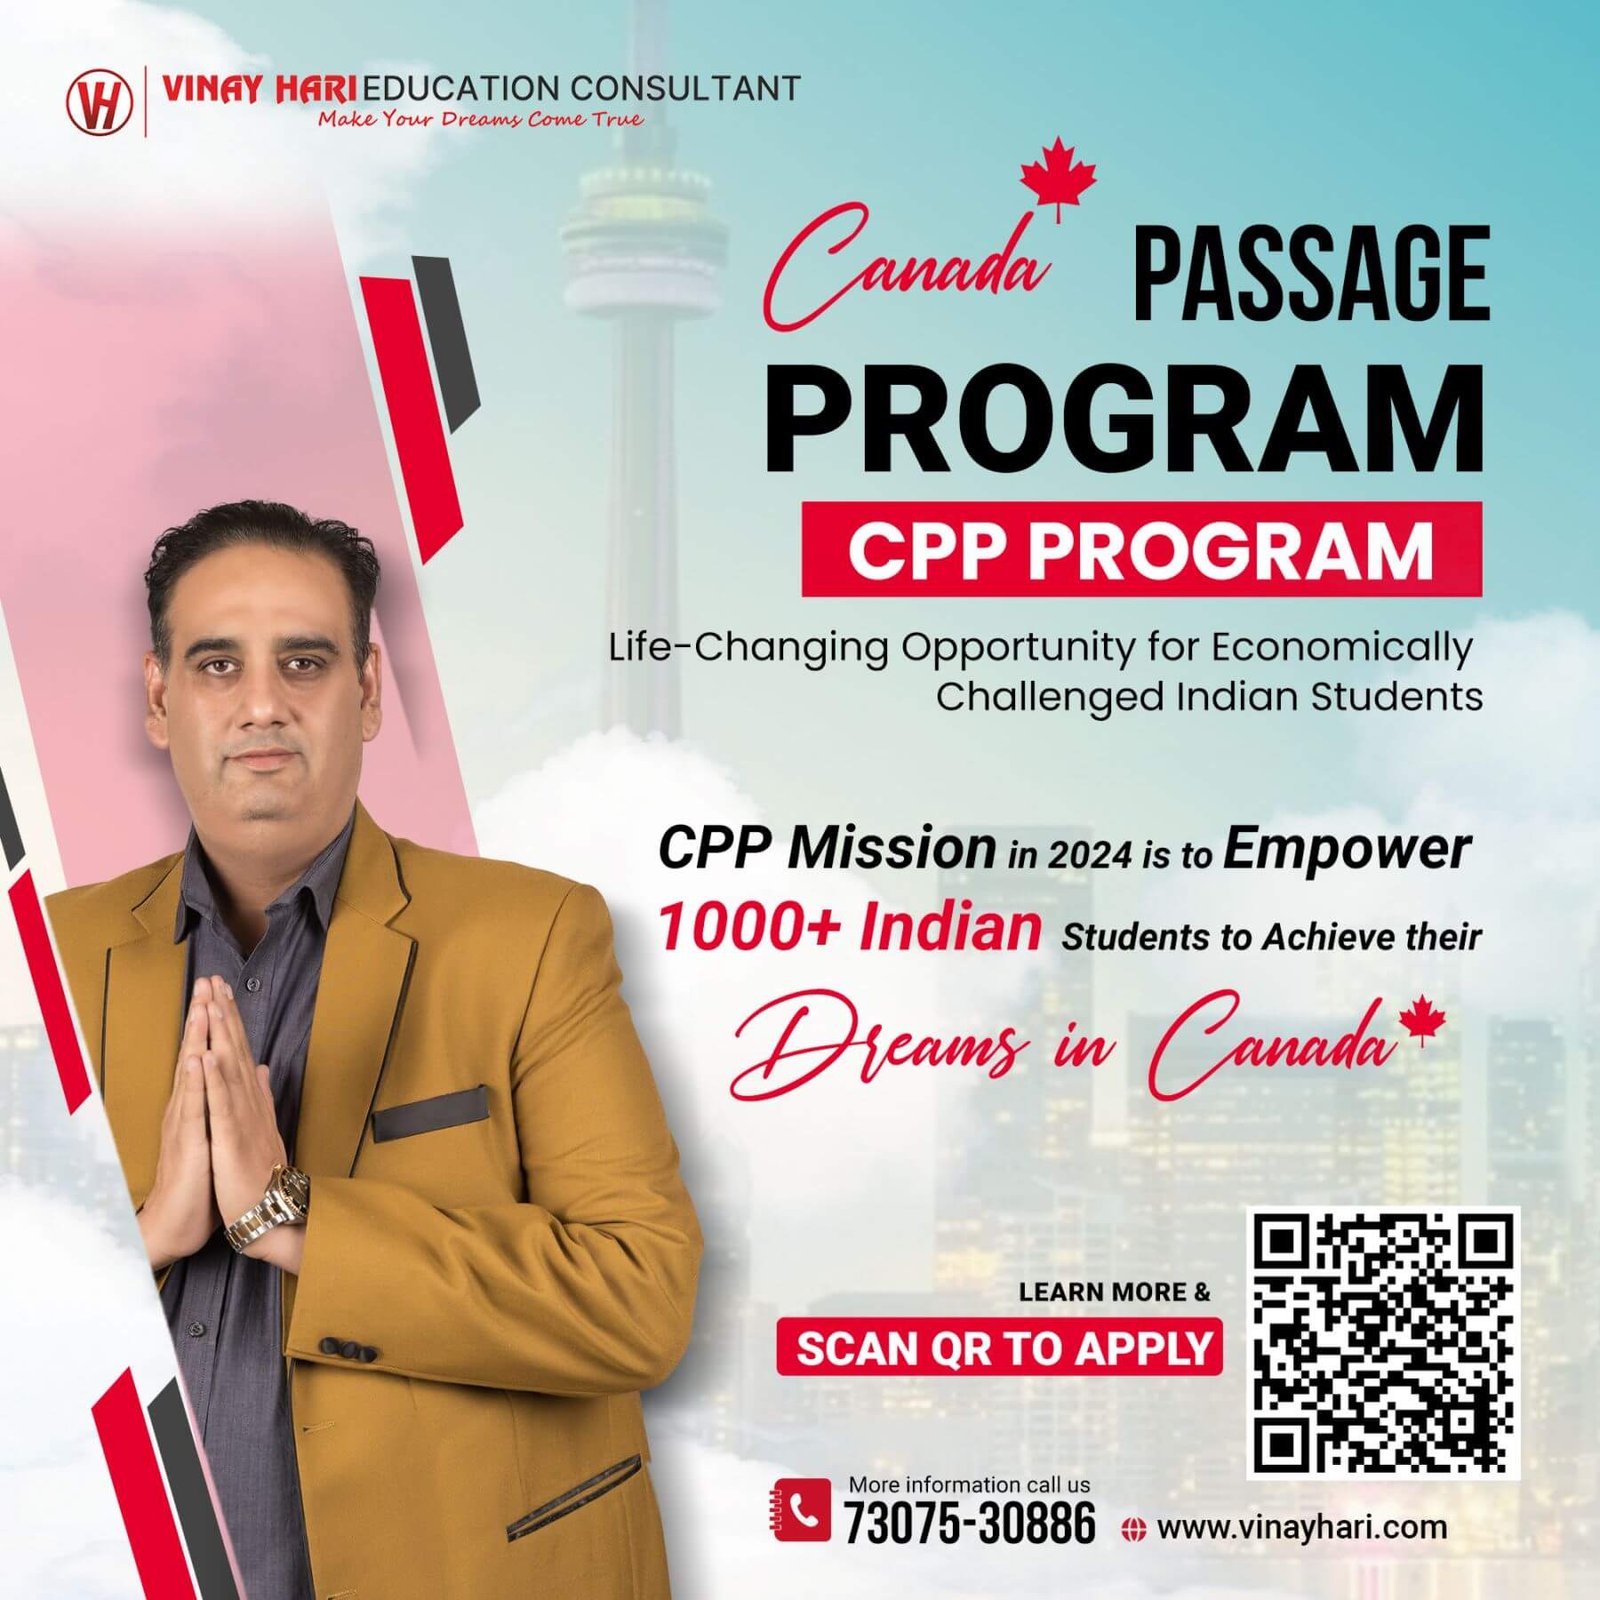 Canada Passage Program: A Life-Changing Opportunity for Economically Challenged Indian Students